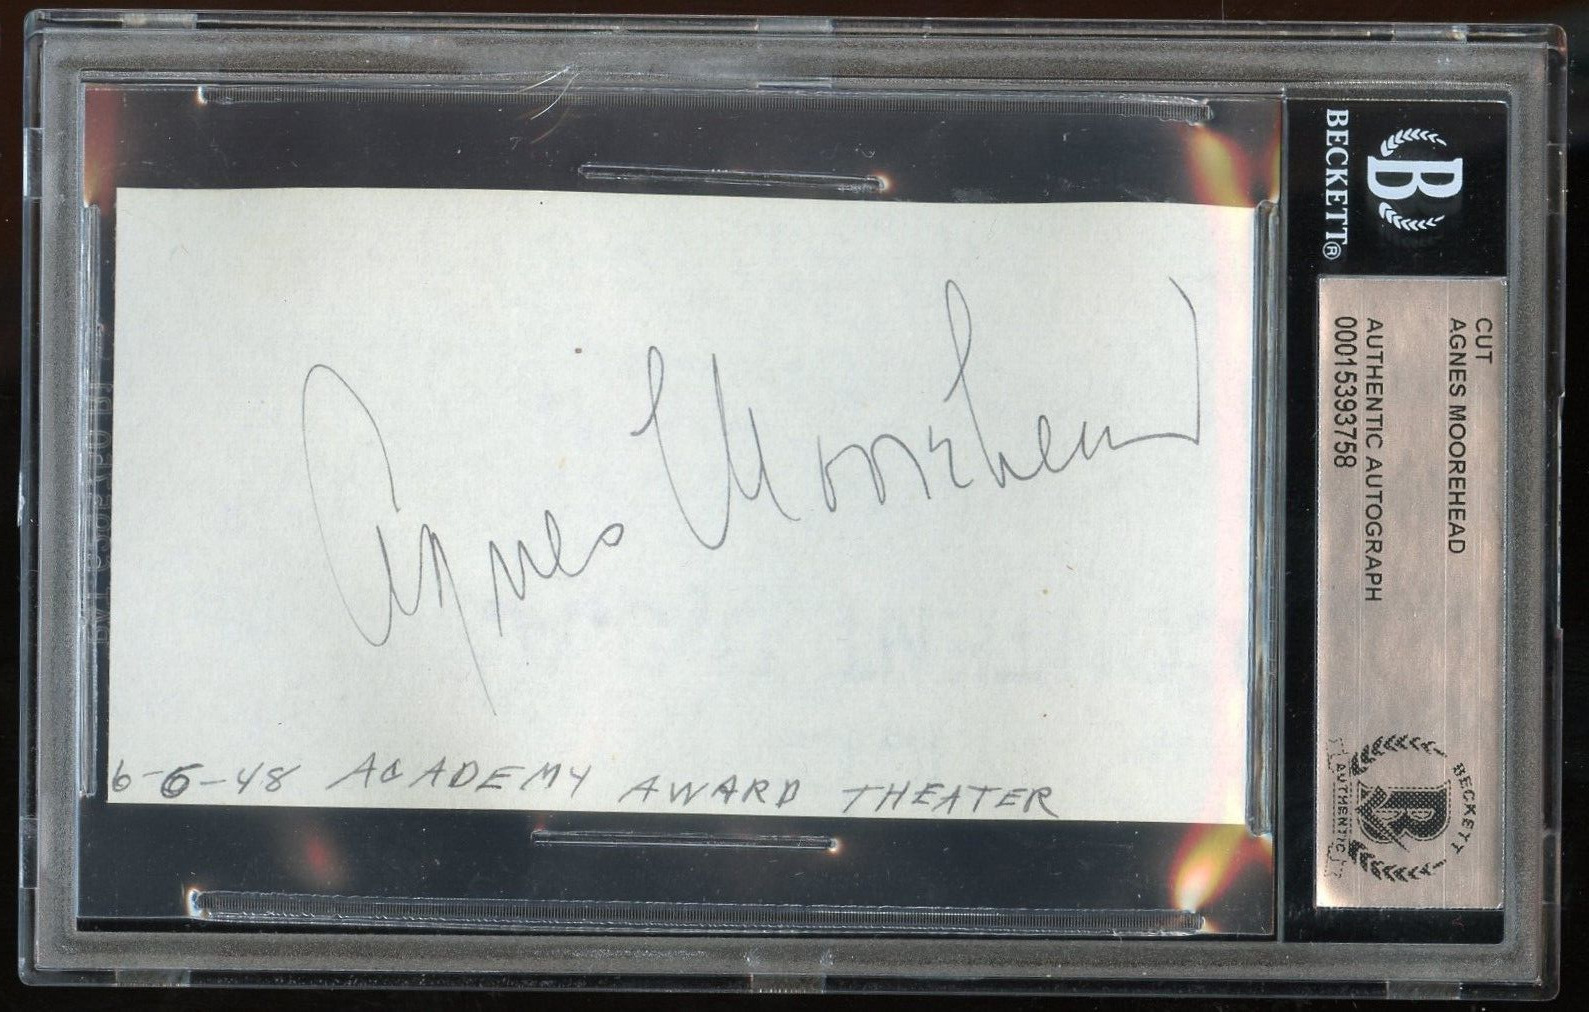 Agnes Moorehead signed 2x4 cut autograph on 6-6-48 at Academy Award Theater BAS